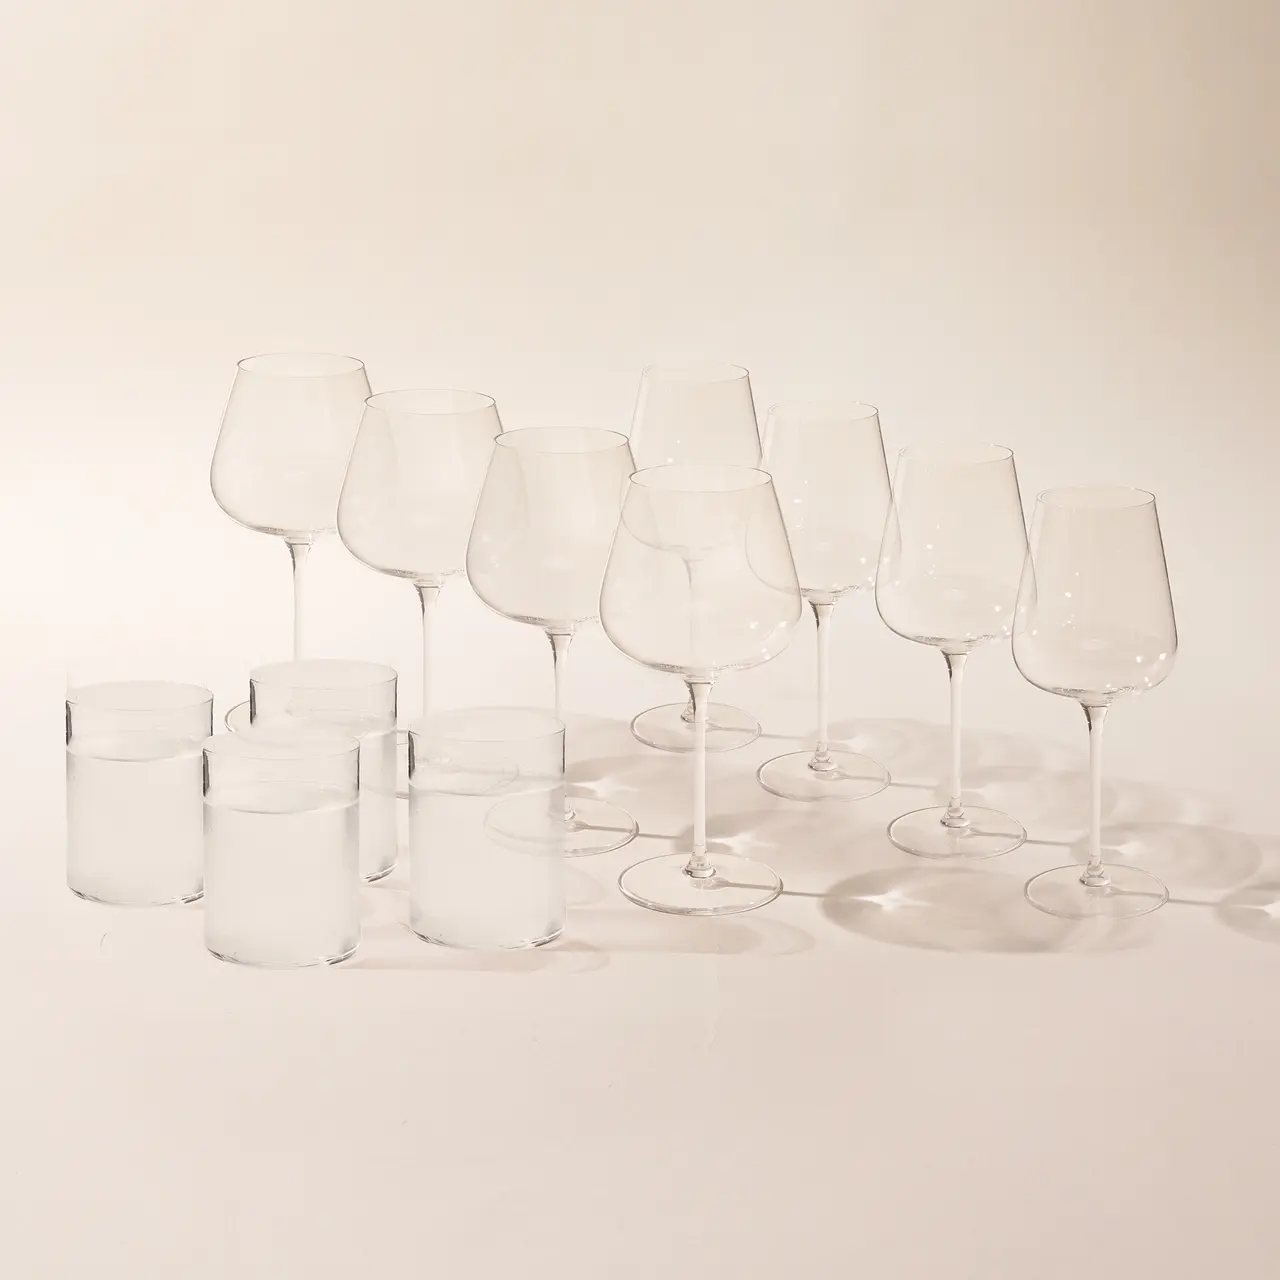 Several clear wine glasses and water glasses are arranged on a table with a neutral background.